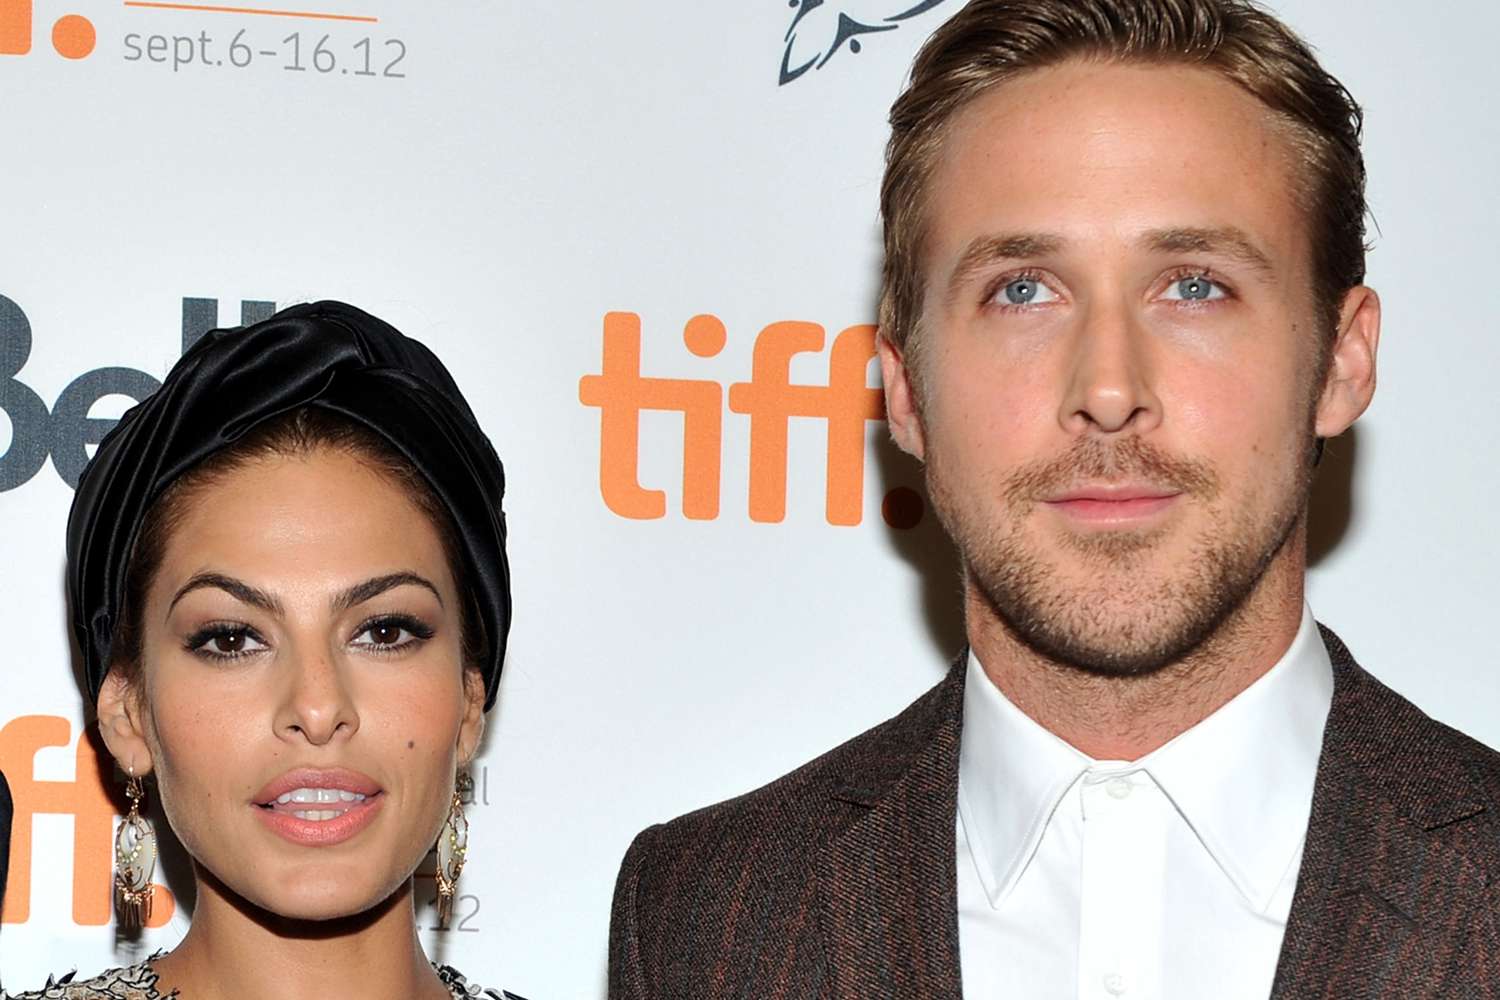 Actors Eva Mendes and Ryan Gosling attend "The Place Beyond The Pines" premiere during the 2012 Toronto International Film Festival at Princess of Wales Theatre on September 7, 2012 in Toronto, Canada